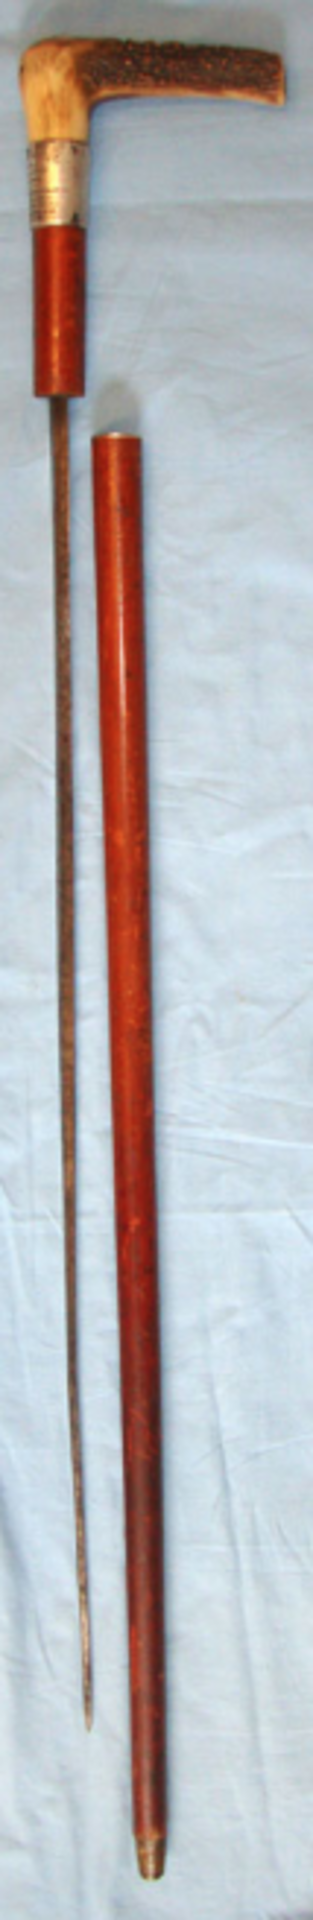 Victorian Leeds Constabulary Police Sword Stick With Sterling Silver Hall Marked Collar - Image 3 of 3